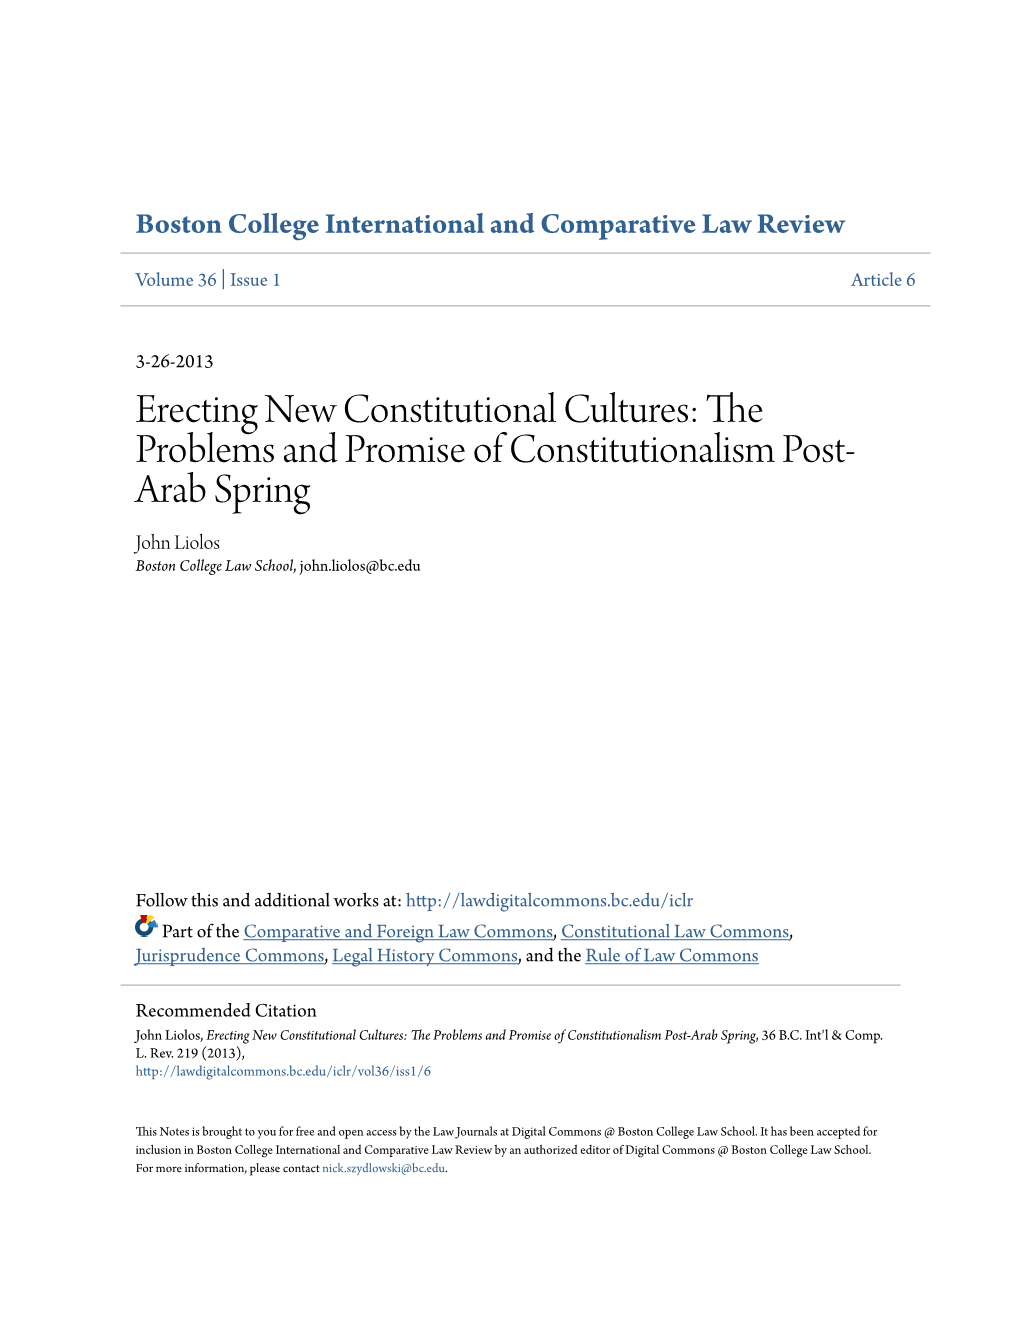 Erecting New Constitutional Cultures: the Problems and Promise of Constitutionalism Post- Arab Spring John Liolos Boston College Law School, John.Liolos@Bc.Edu